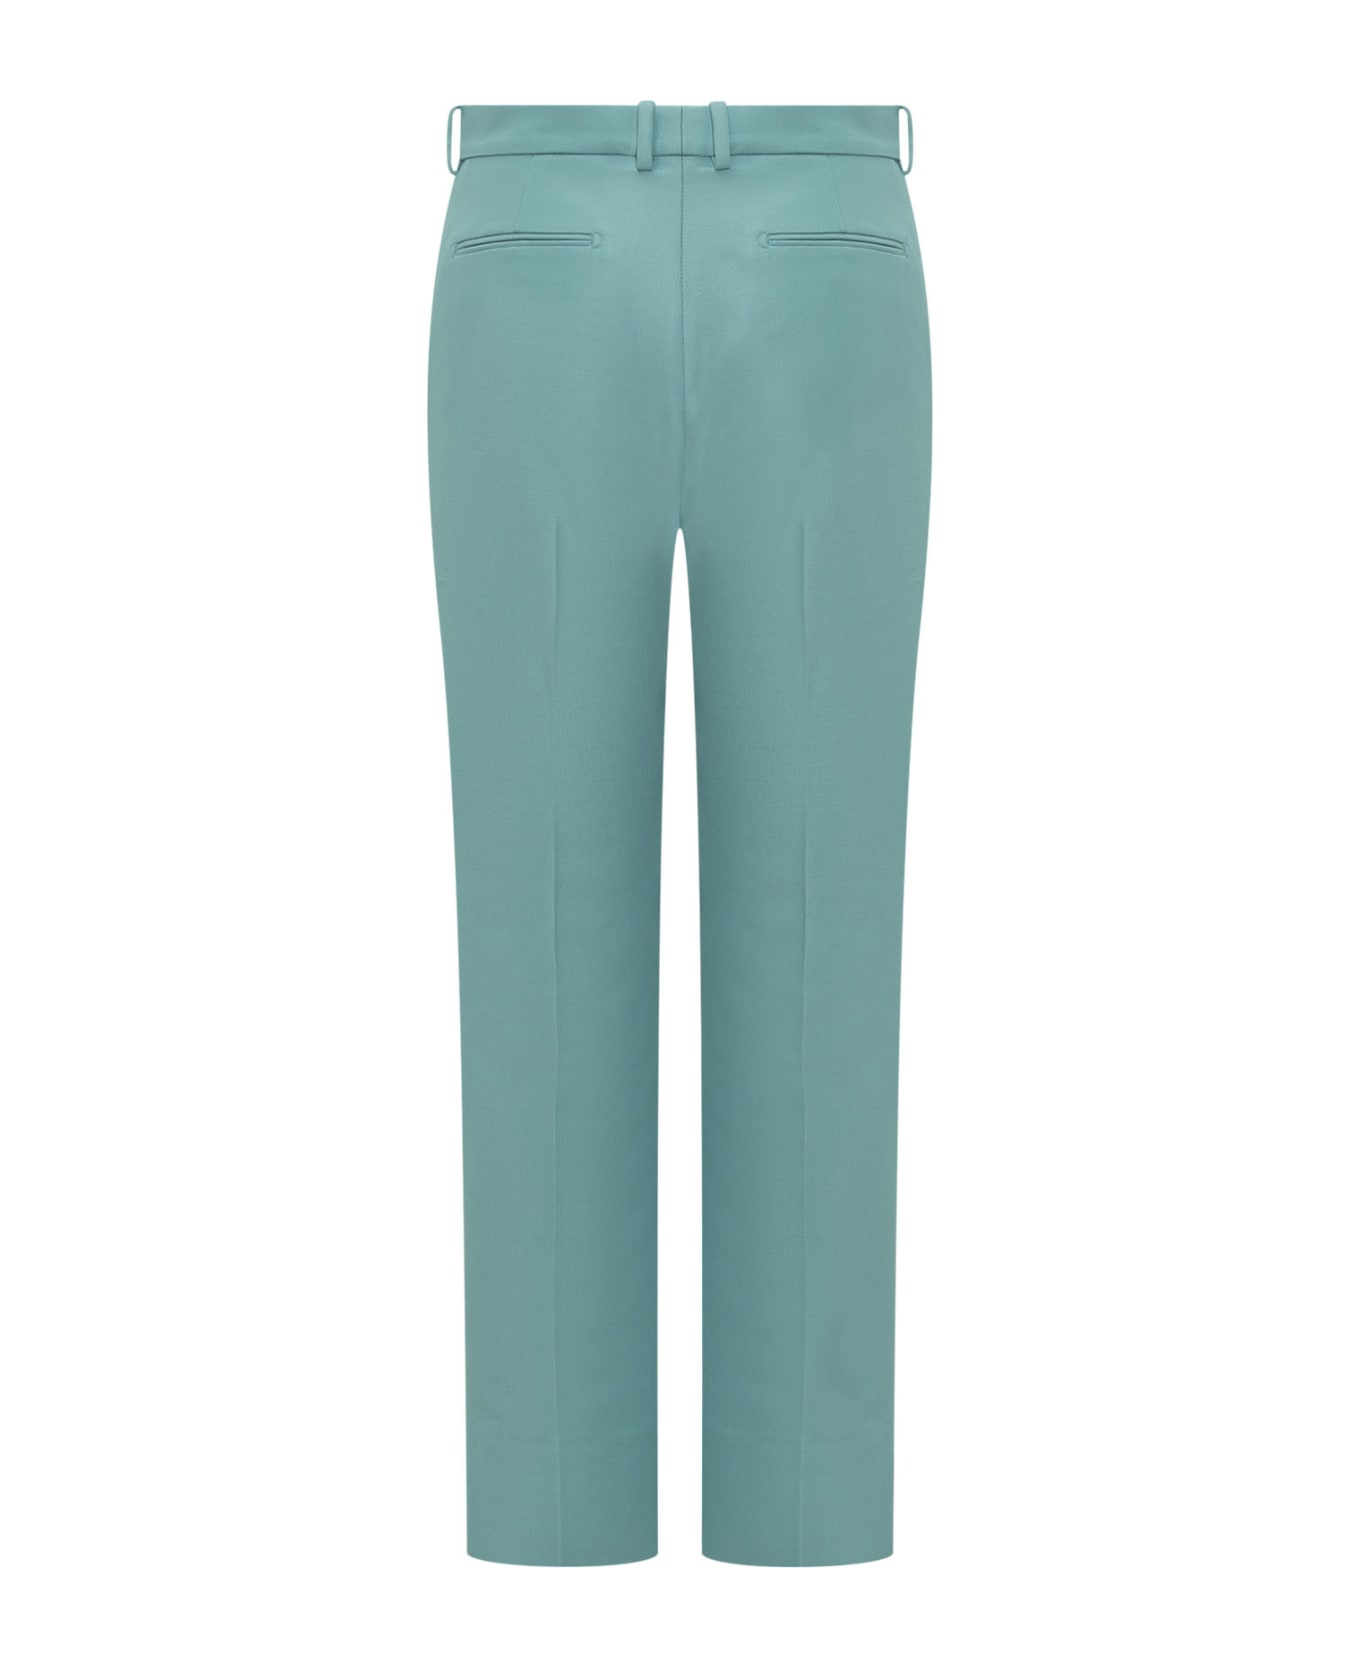 Tom Ford Wool And Viscose Blend Pants - LIGHT TURQUOISE